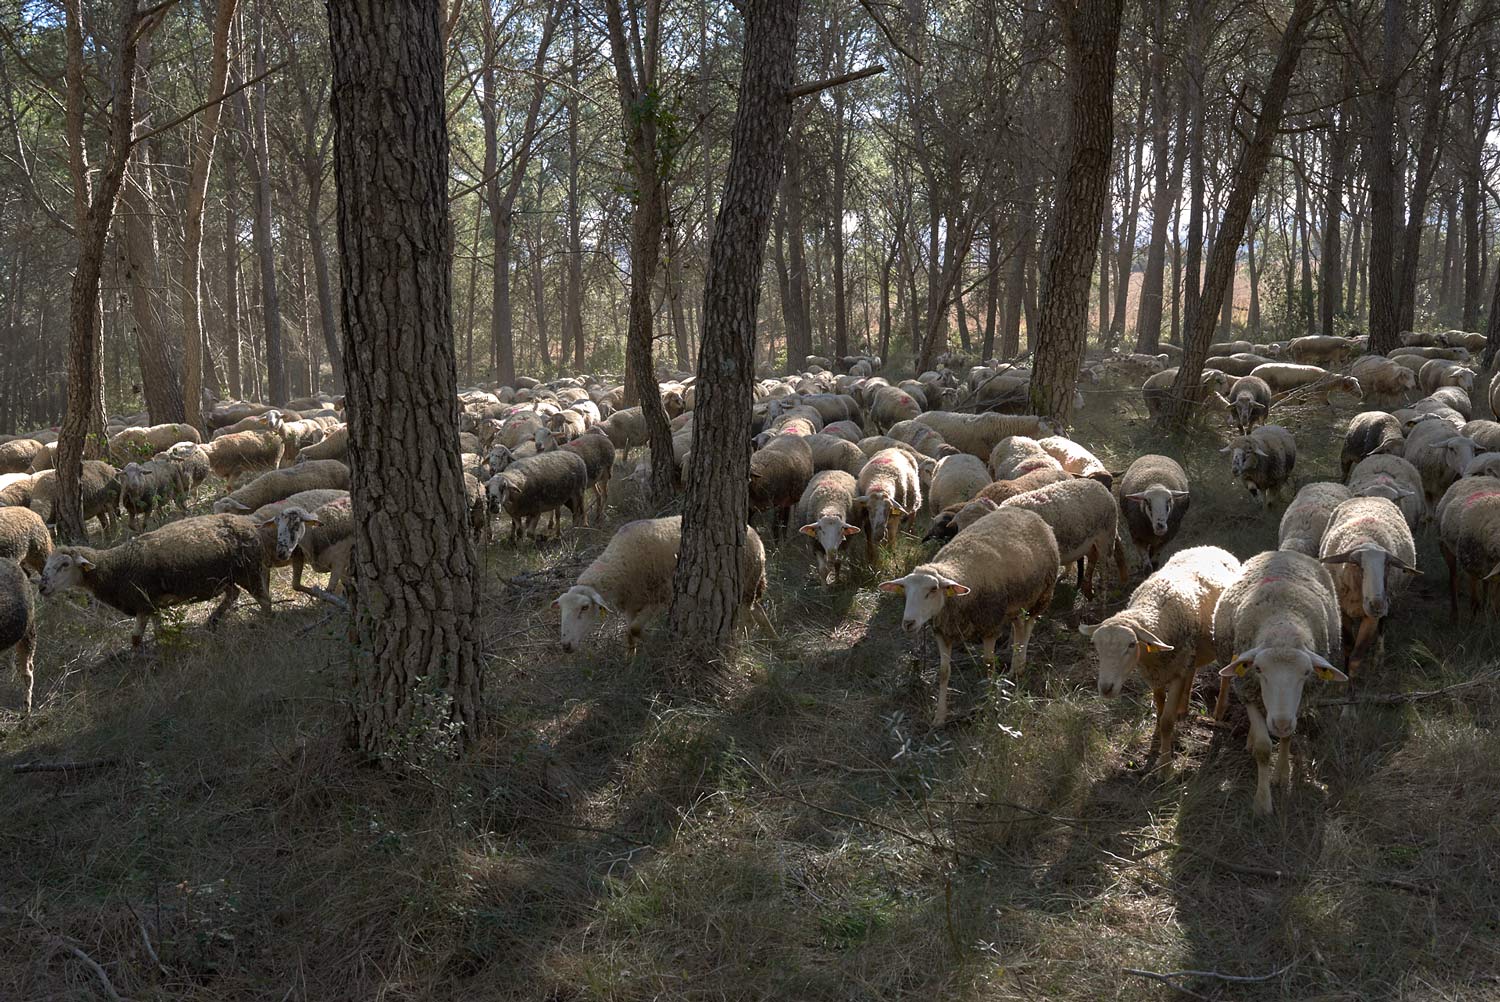 Five sheep and goat shepherds in Spain’s Costa Brava region graze their four-legged brigades in strategic spots identified by the fire department to prevent the most destructive fires.